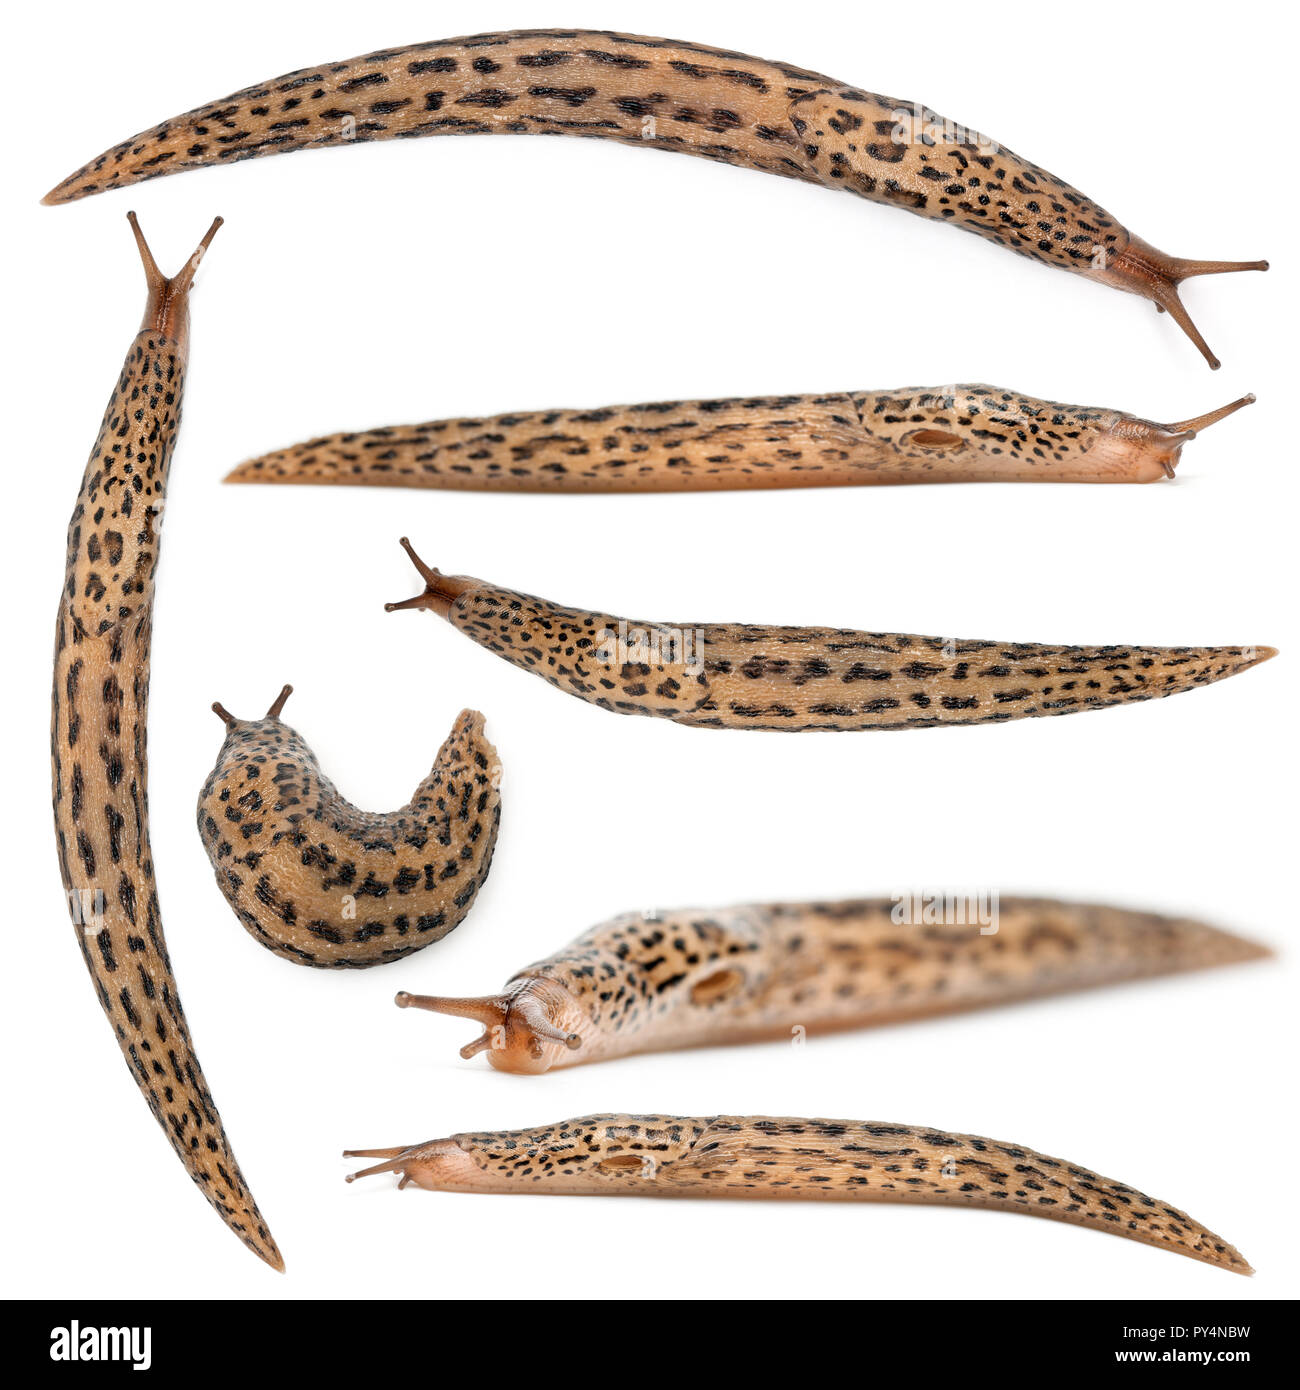 Leopard slug - Limax maximus, in front of white background Stock Photo